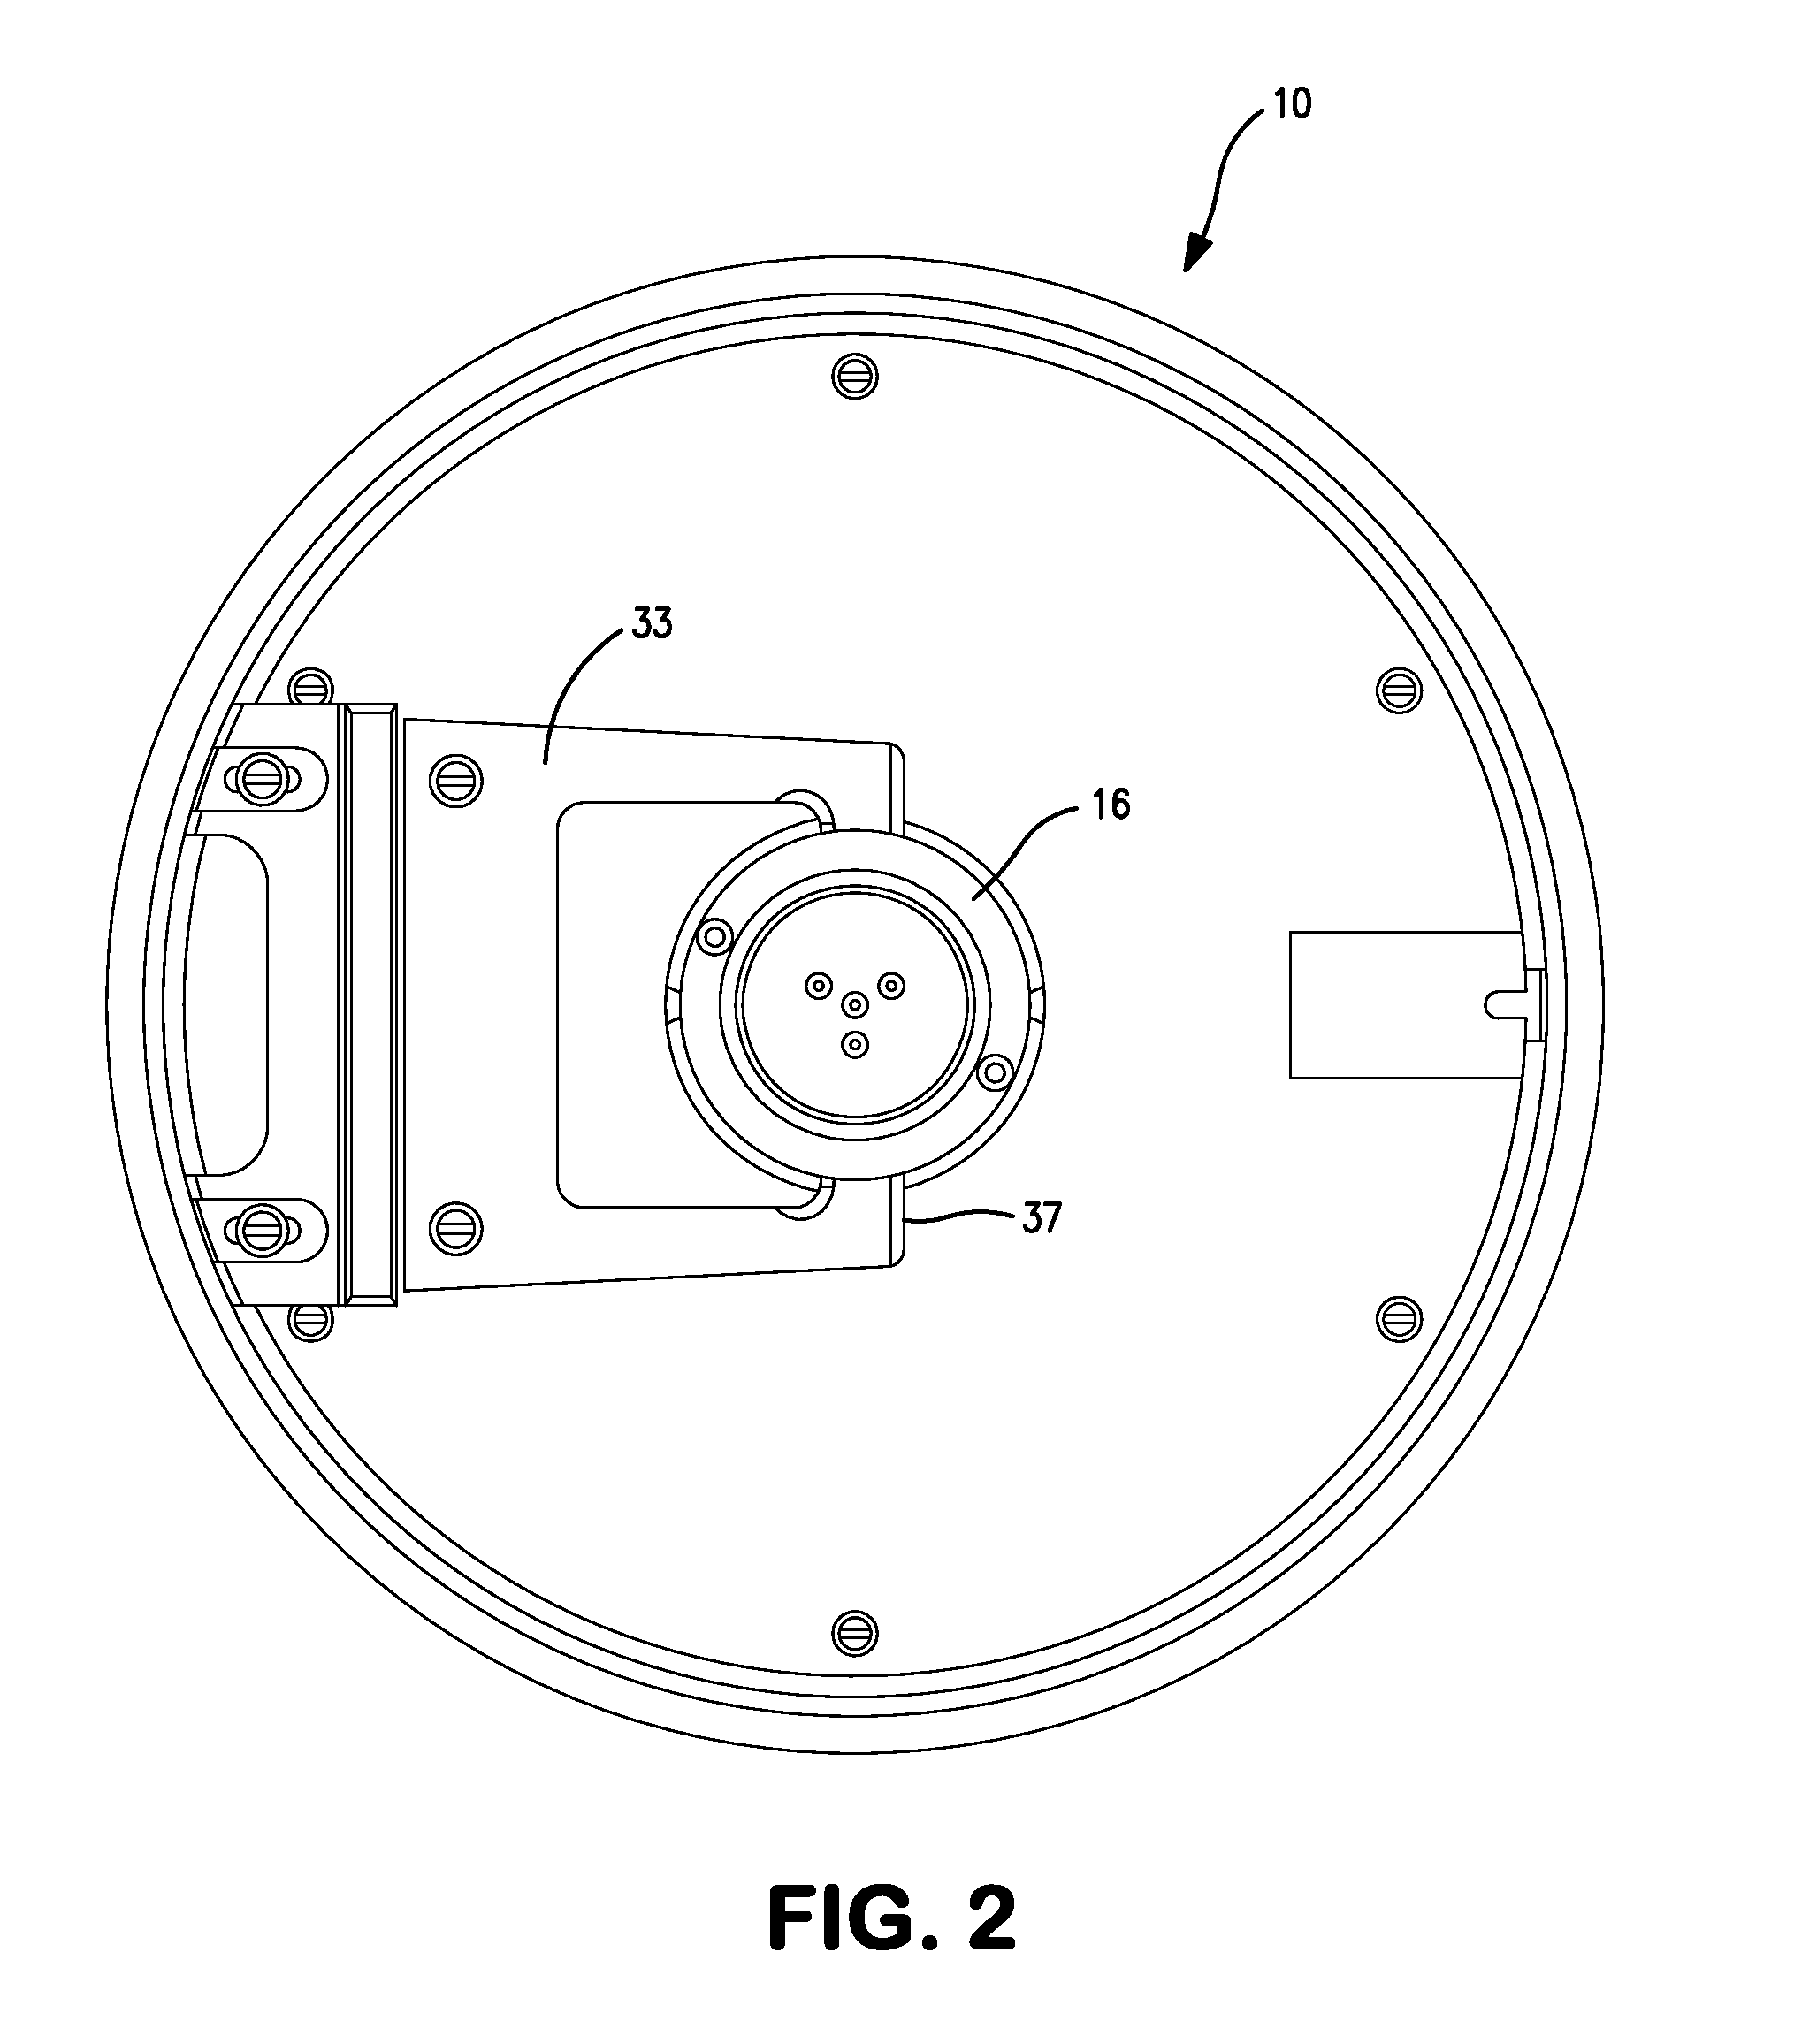 Liquid sample collection device for zonal centrifugation